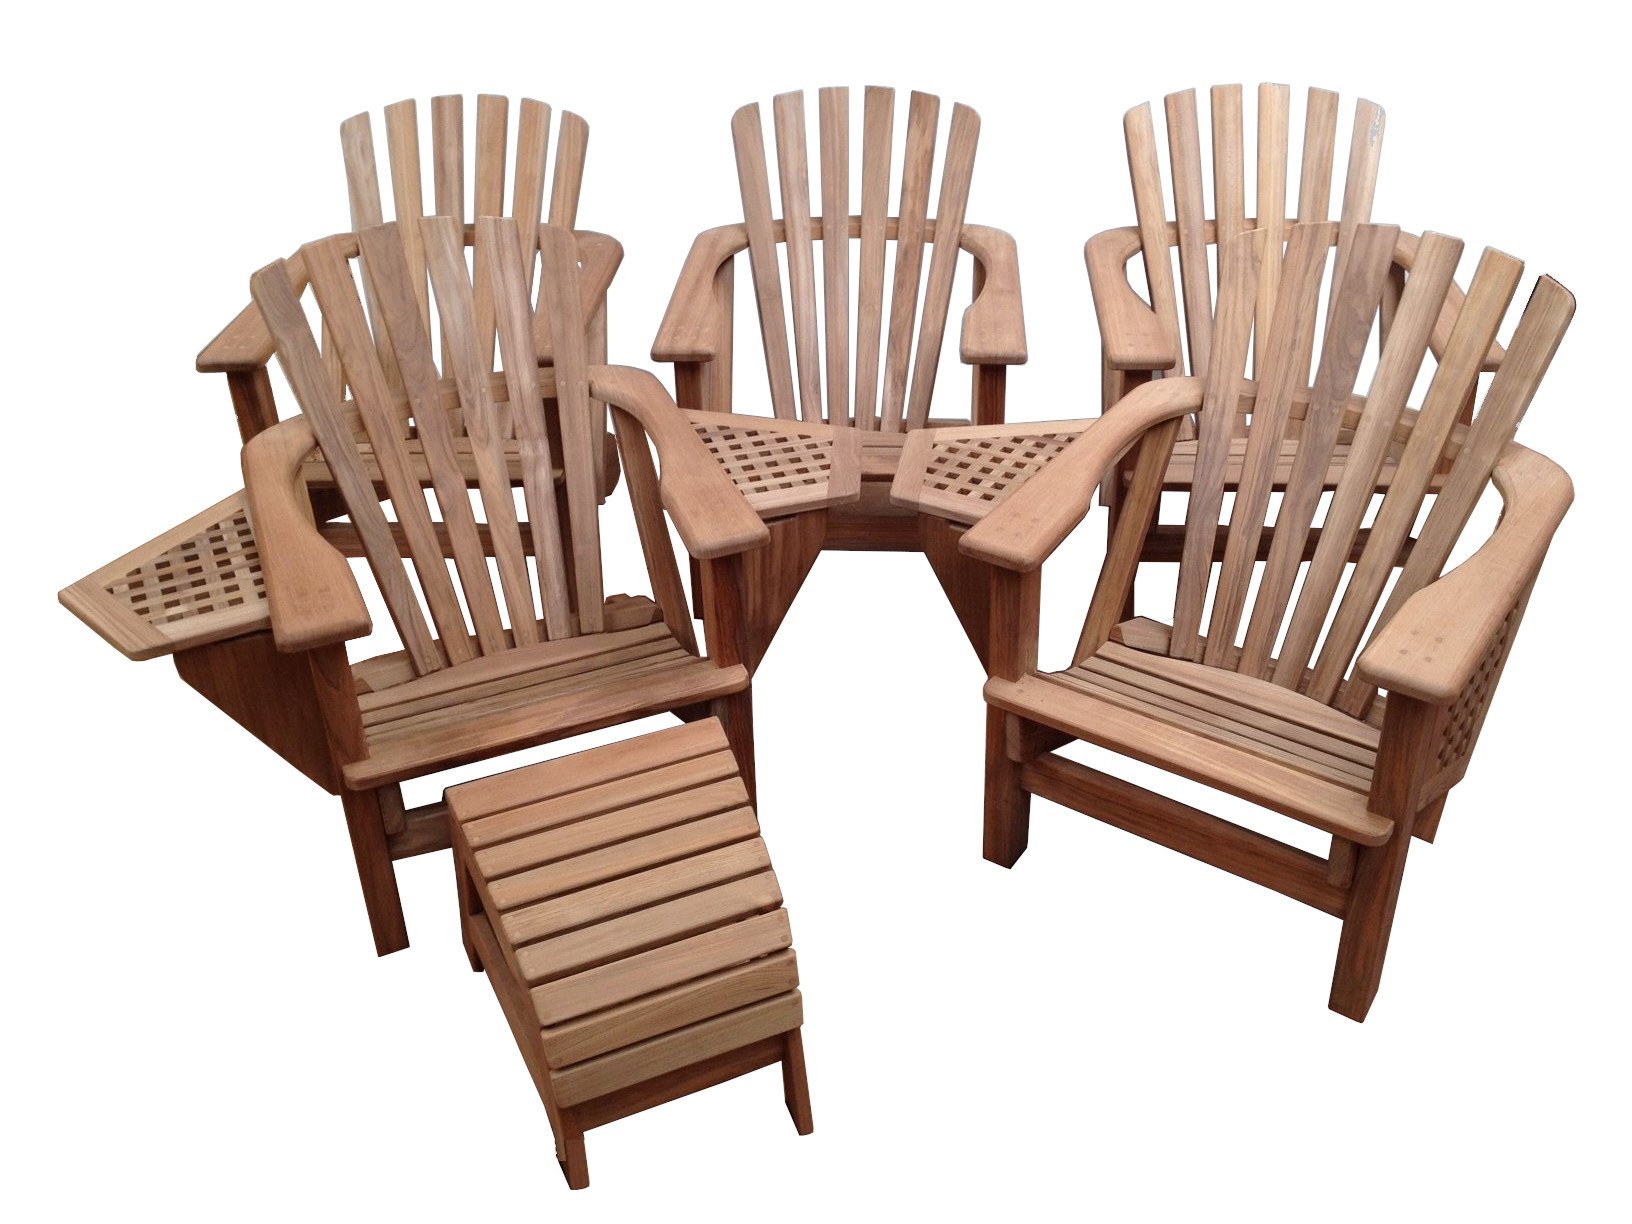 View of Adirondack chair with foot bench